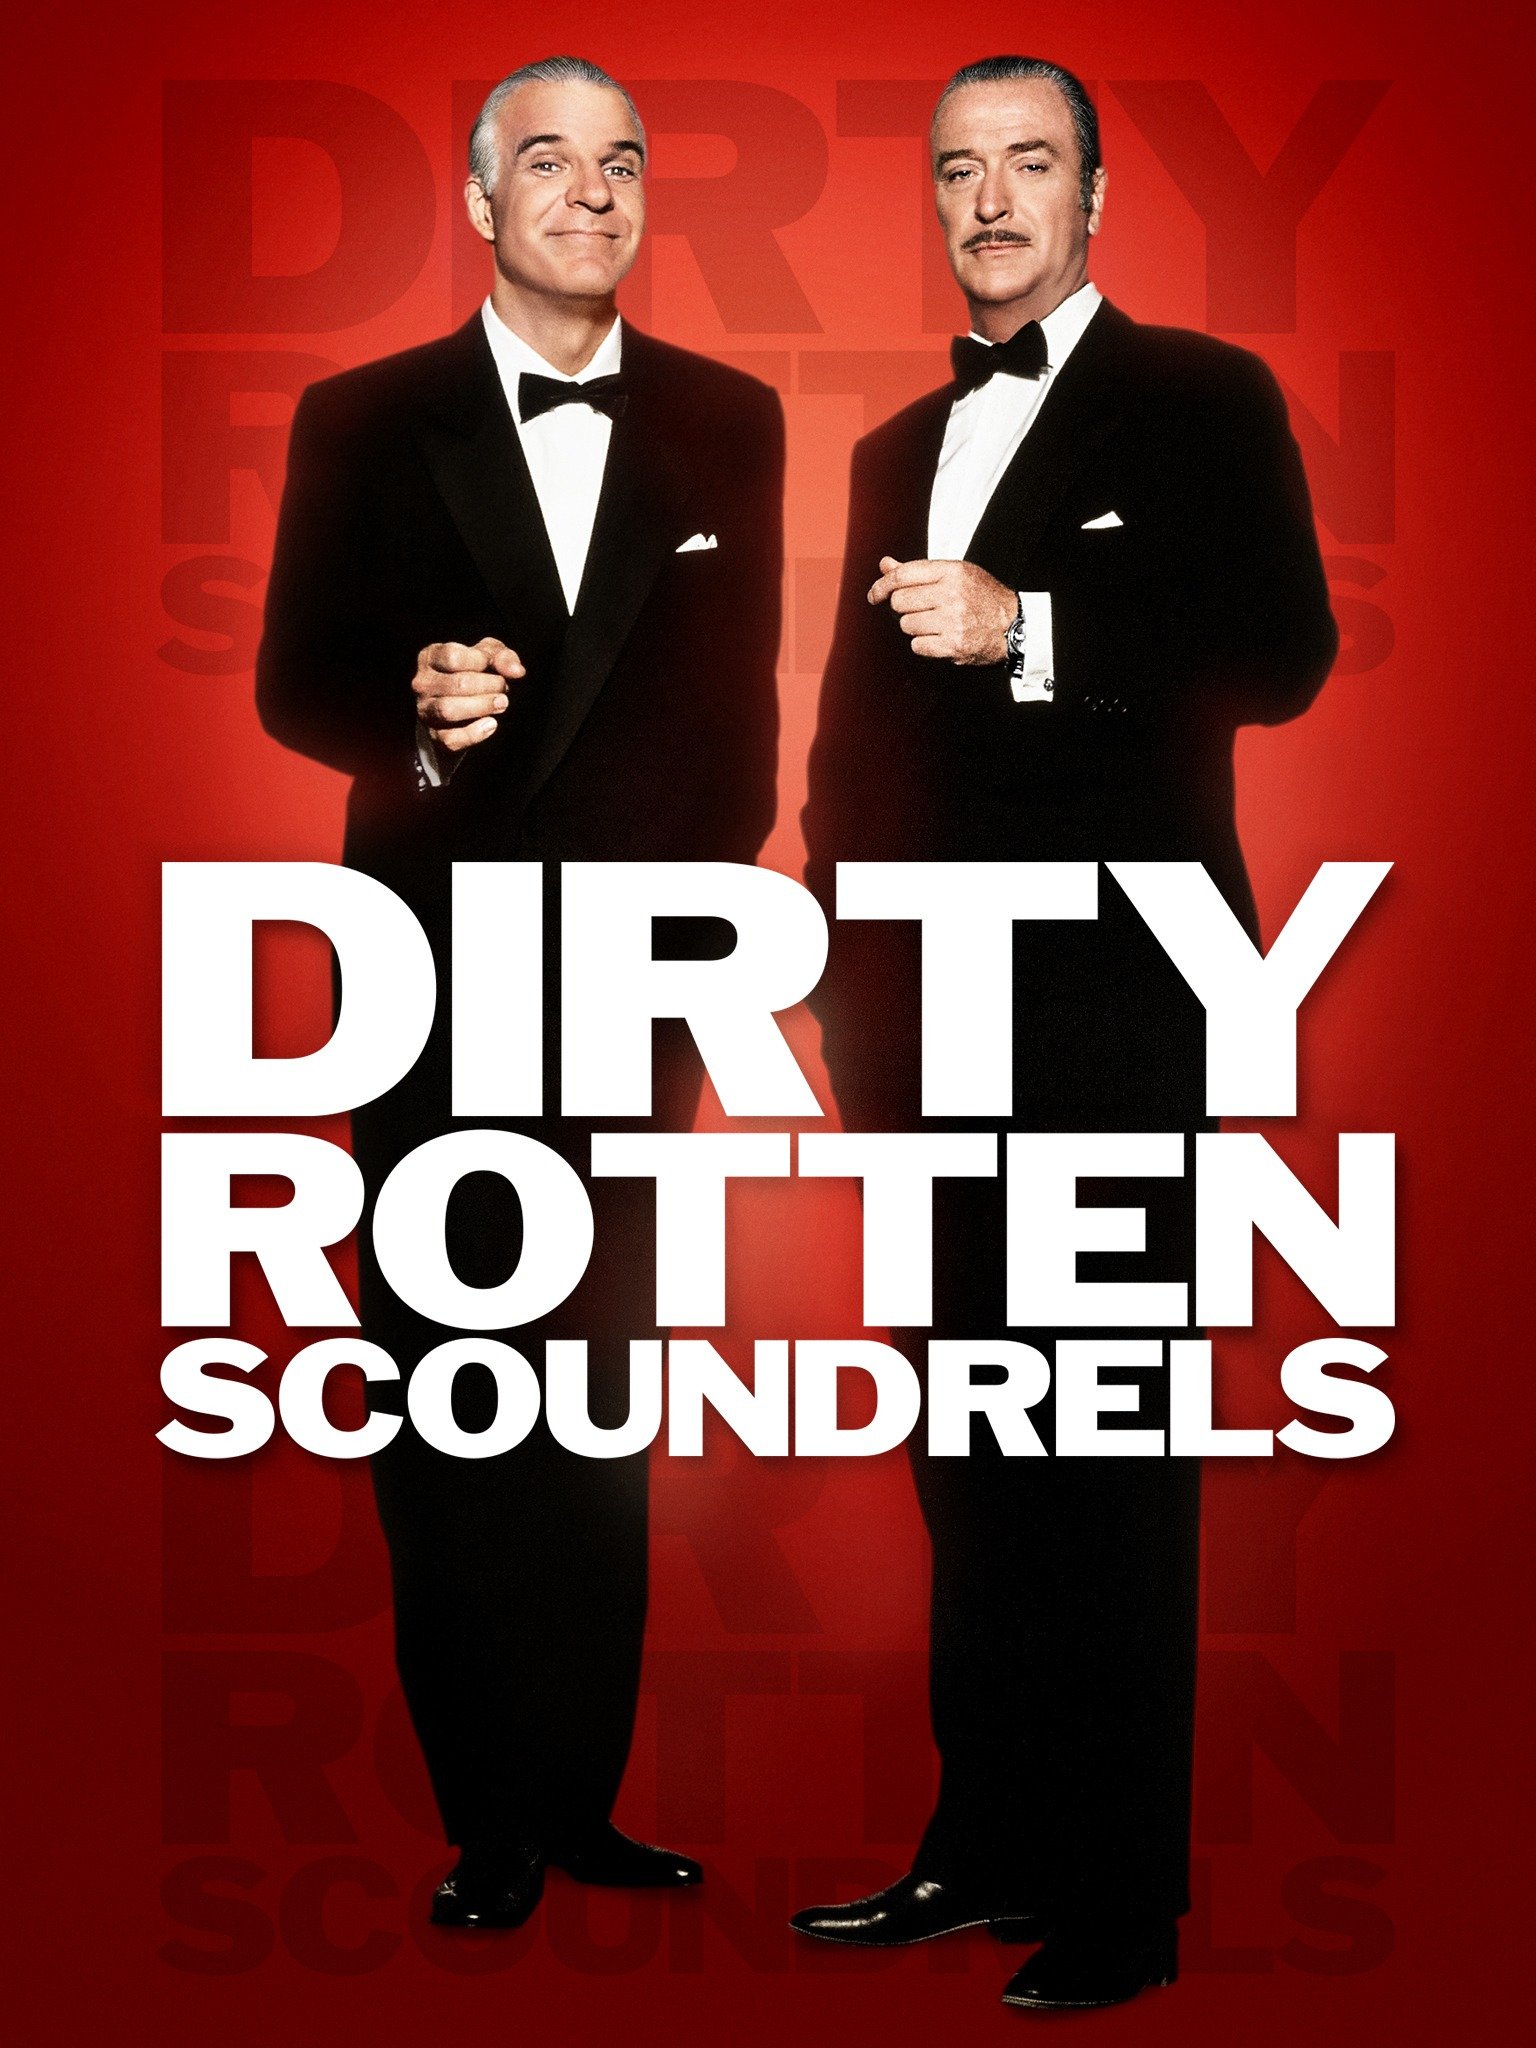 Dirty Rotten Scoundrels Official Clip - Do You Feel This? - Trailers and Videos